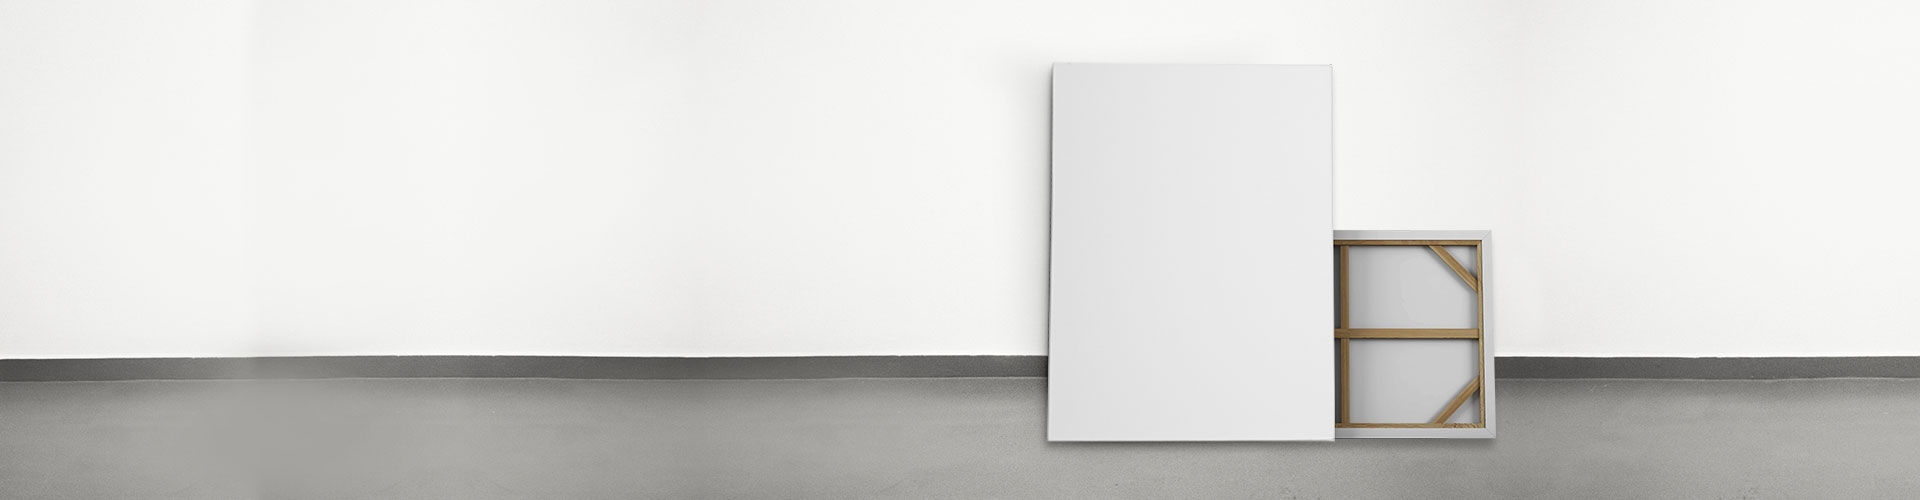 BLANK PRE-STRETCHED CANVAS